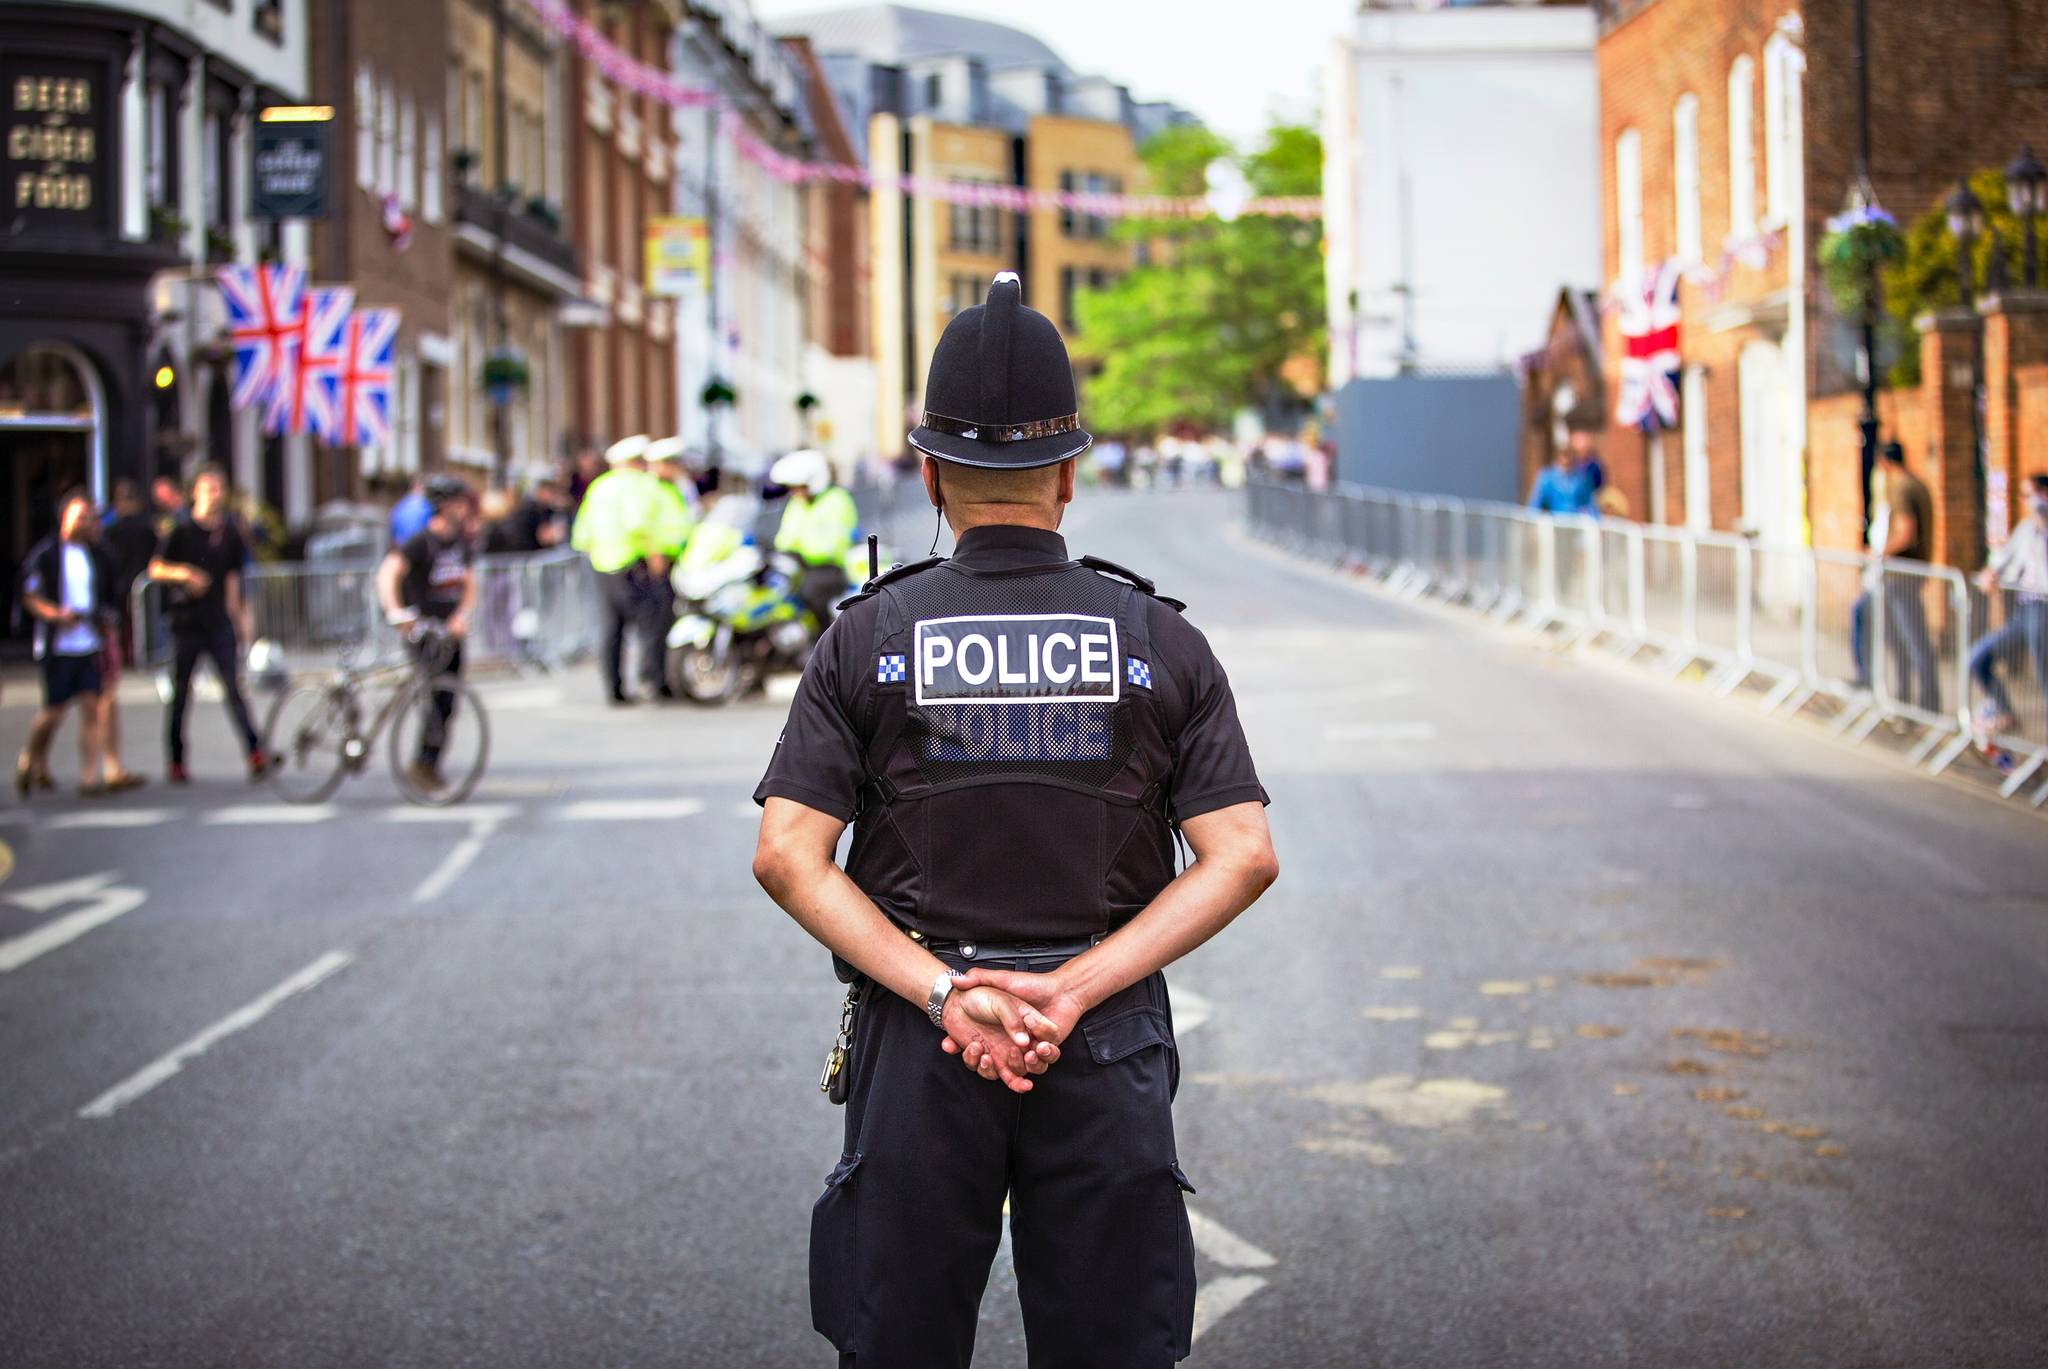 Why are Britons losing trust in the police?